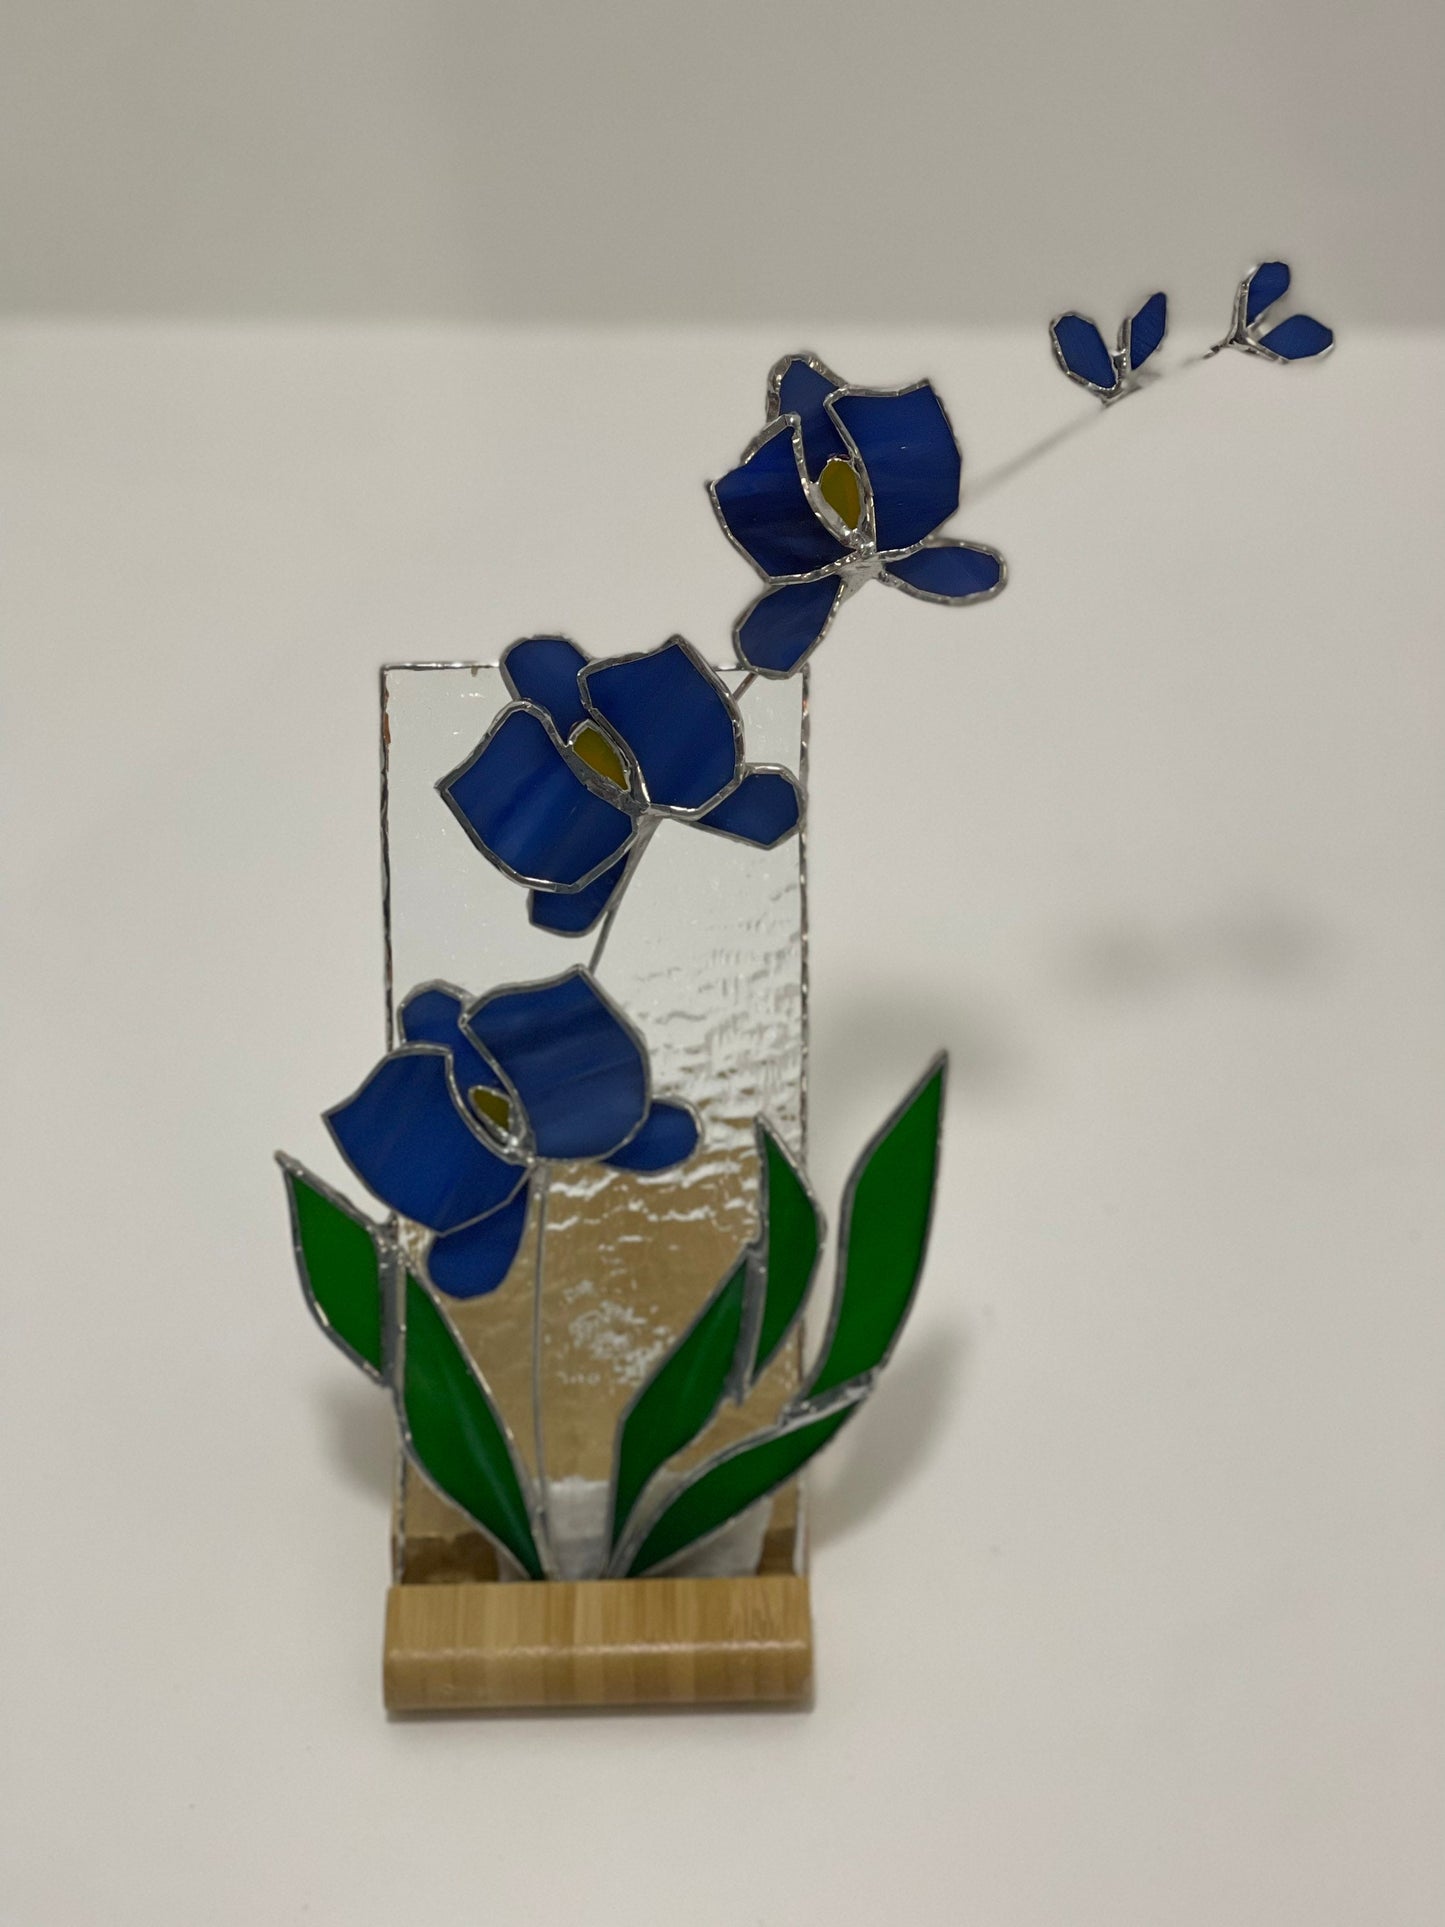 Stained Glass Orchid Panel With Stand • 3D Stained Glass Home Decor